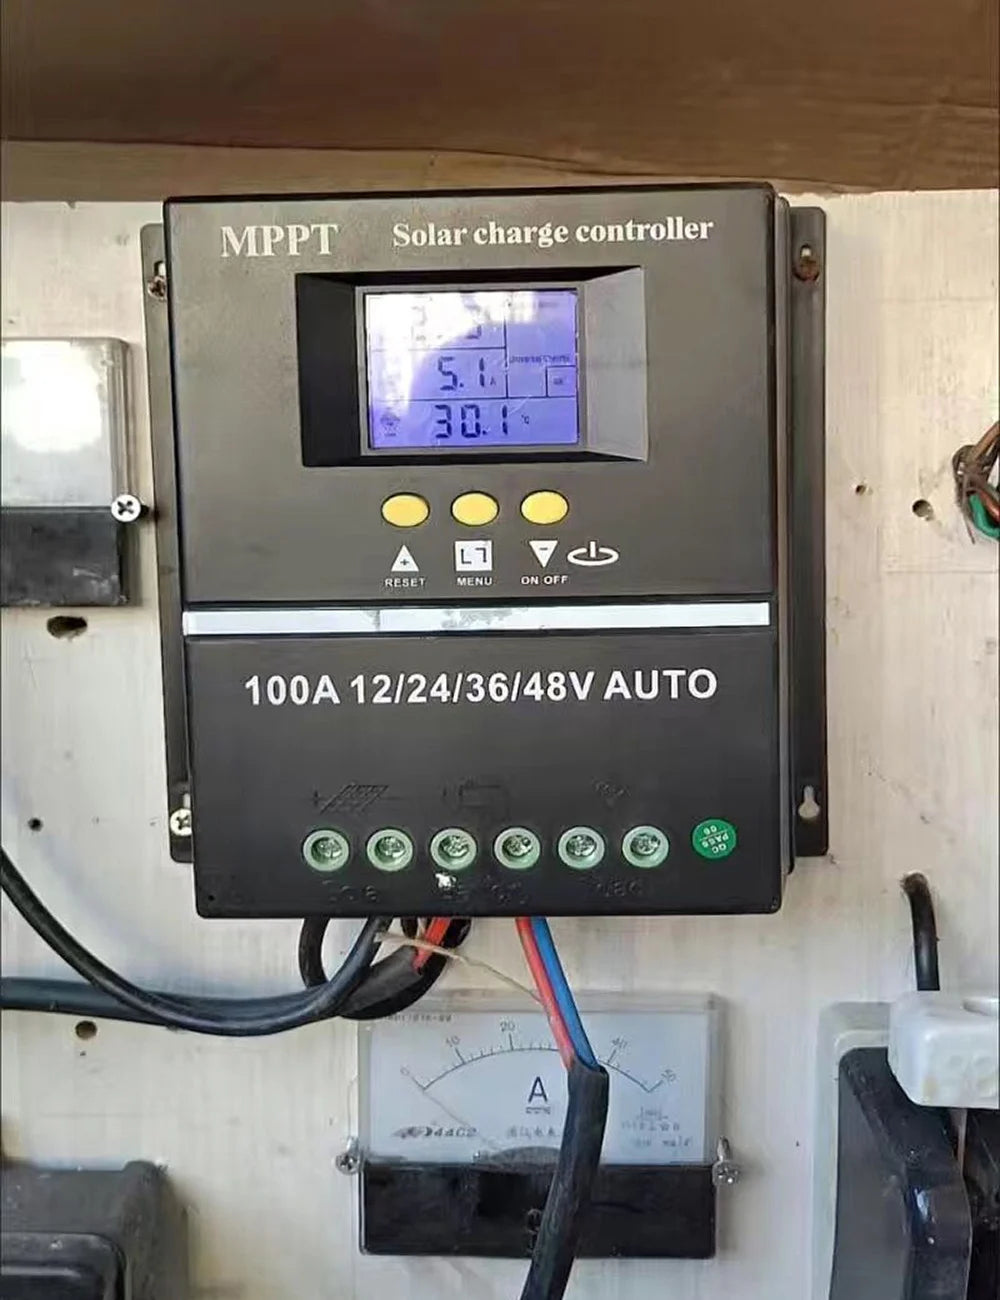 100A 80A 60A MPPT Solar Charge Controller, Max Power Point Tracking (MPPT) solar charge controller, supports up to 100A, compatible with 12/24/36/48V systems.